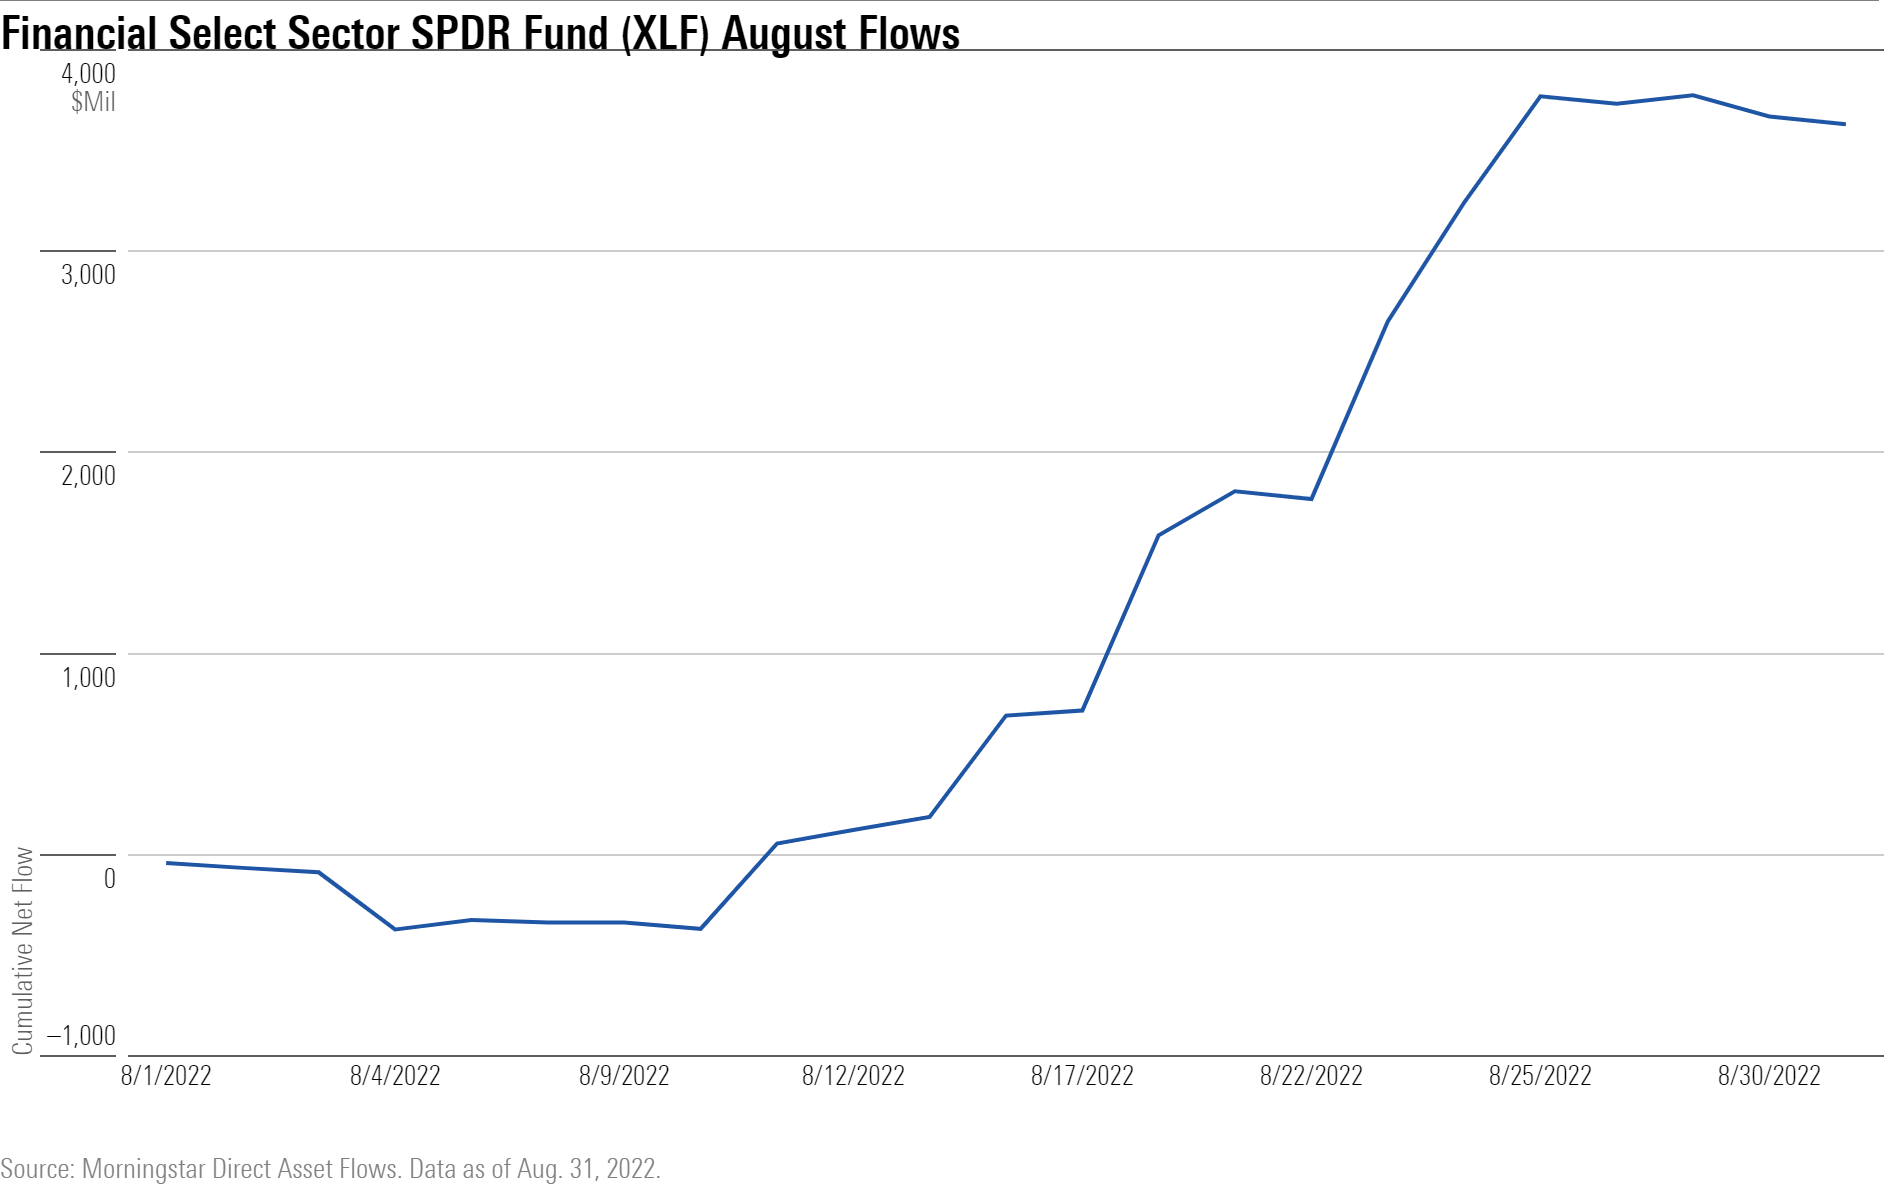 A line graph showing the rising flows for Financial Select Sector SPDR ETF during the month of August.